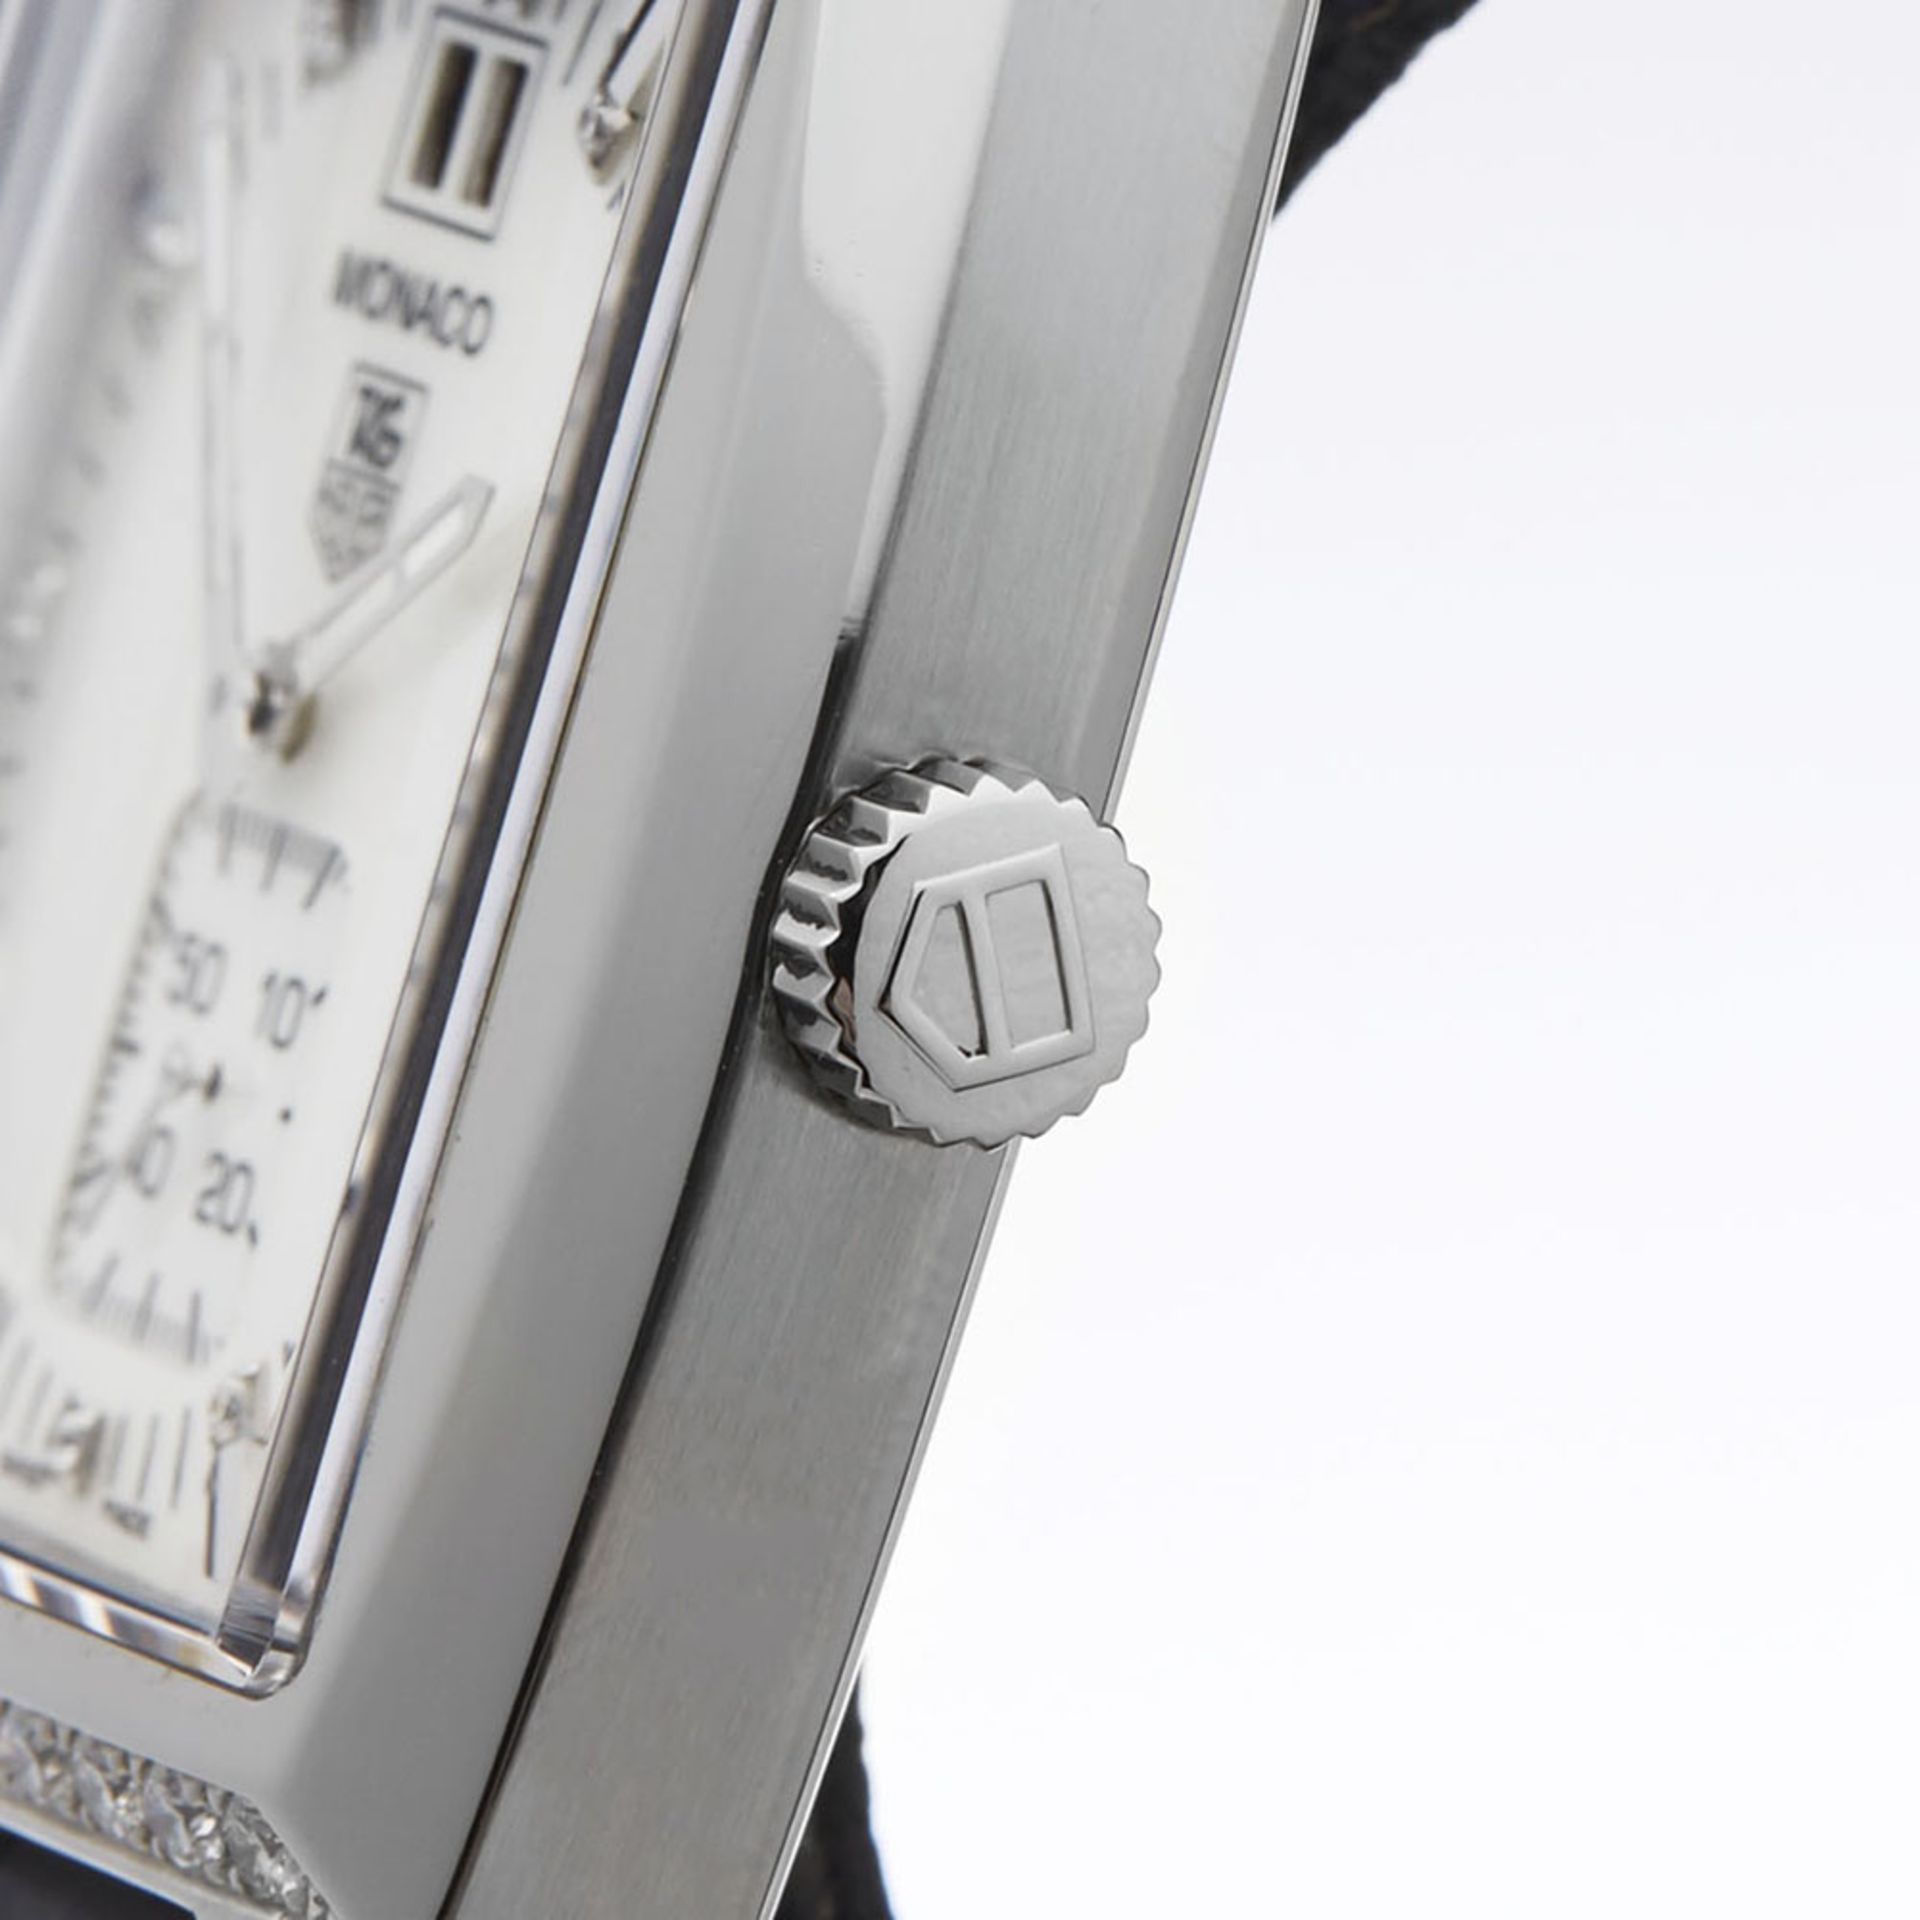 2010 Tag Heuer Monaco 37mm Stainless Steel - WAW1313 - Image 7 of 9